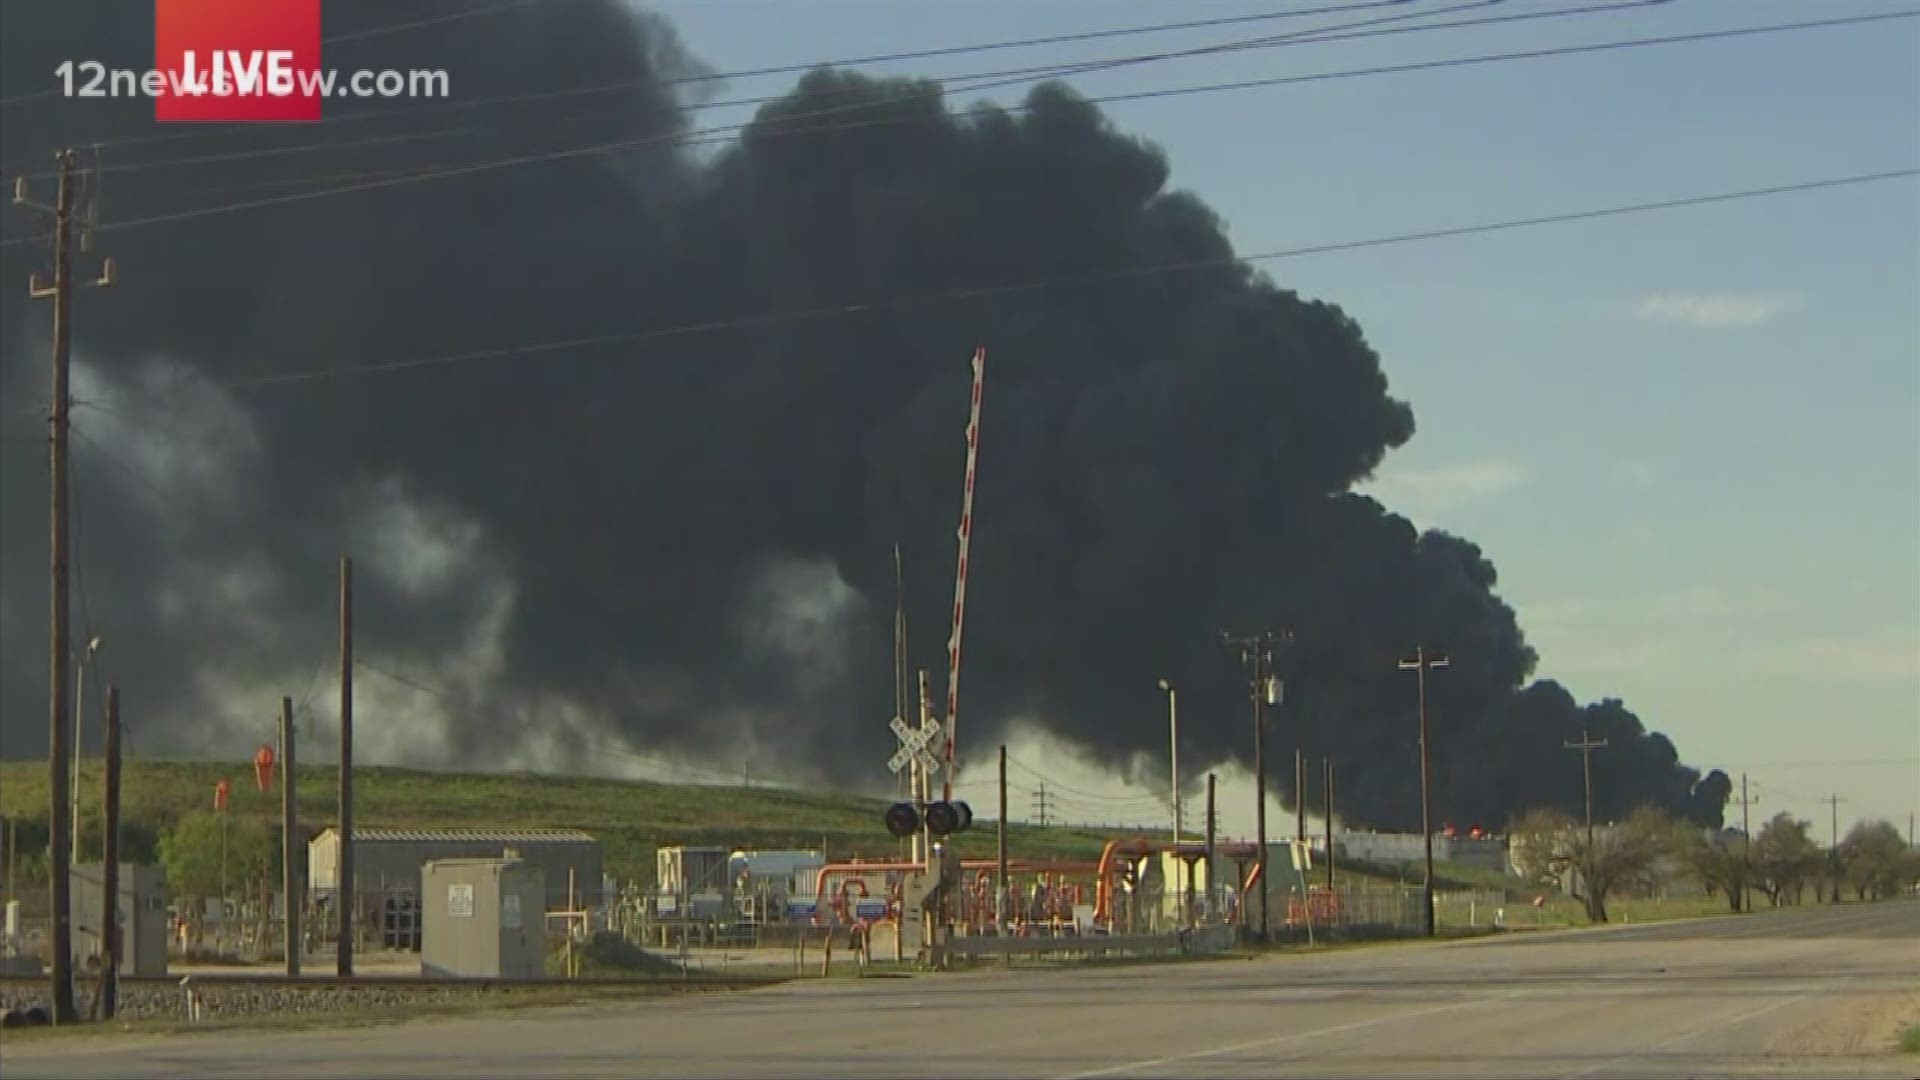 Black smoke continues to pour from multiple tanks in the facility.